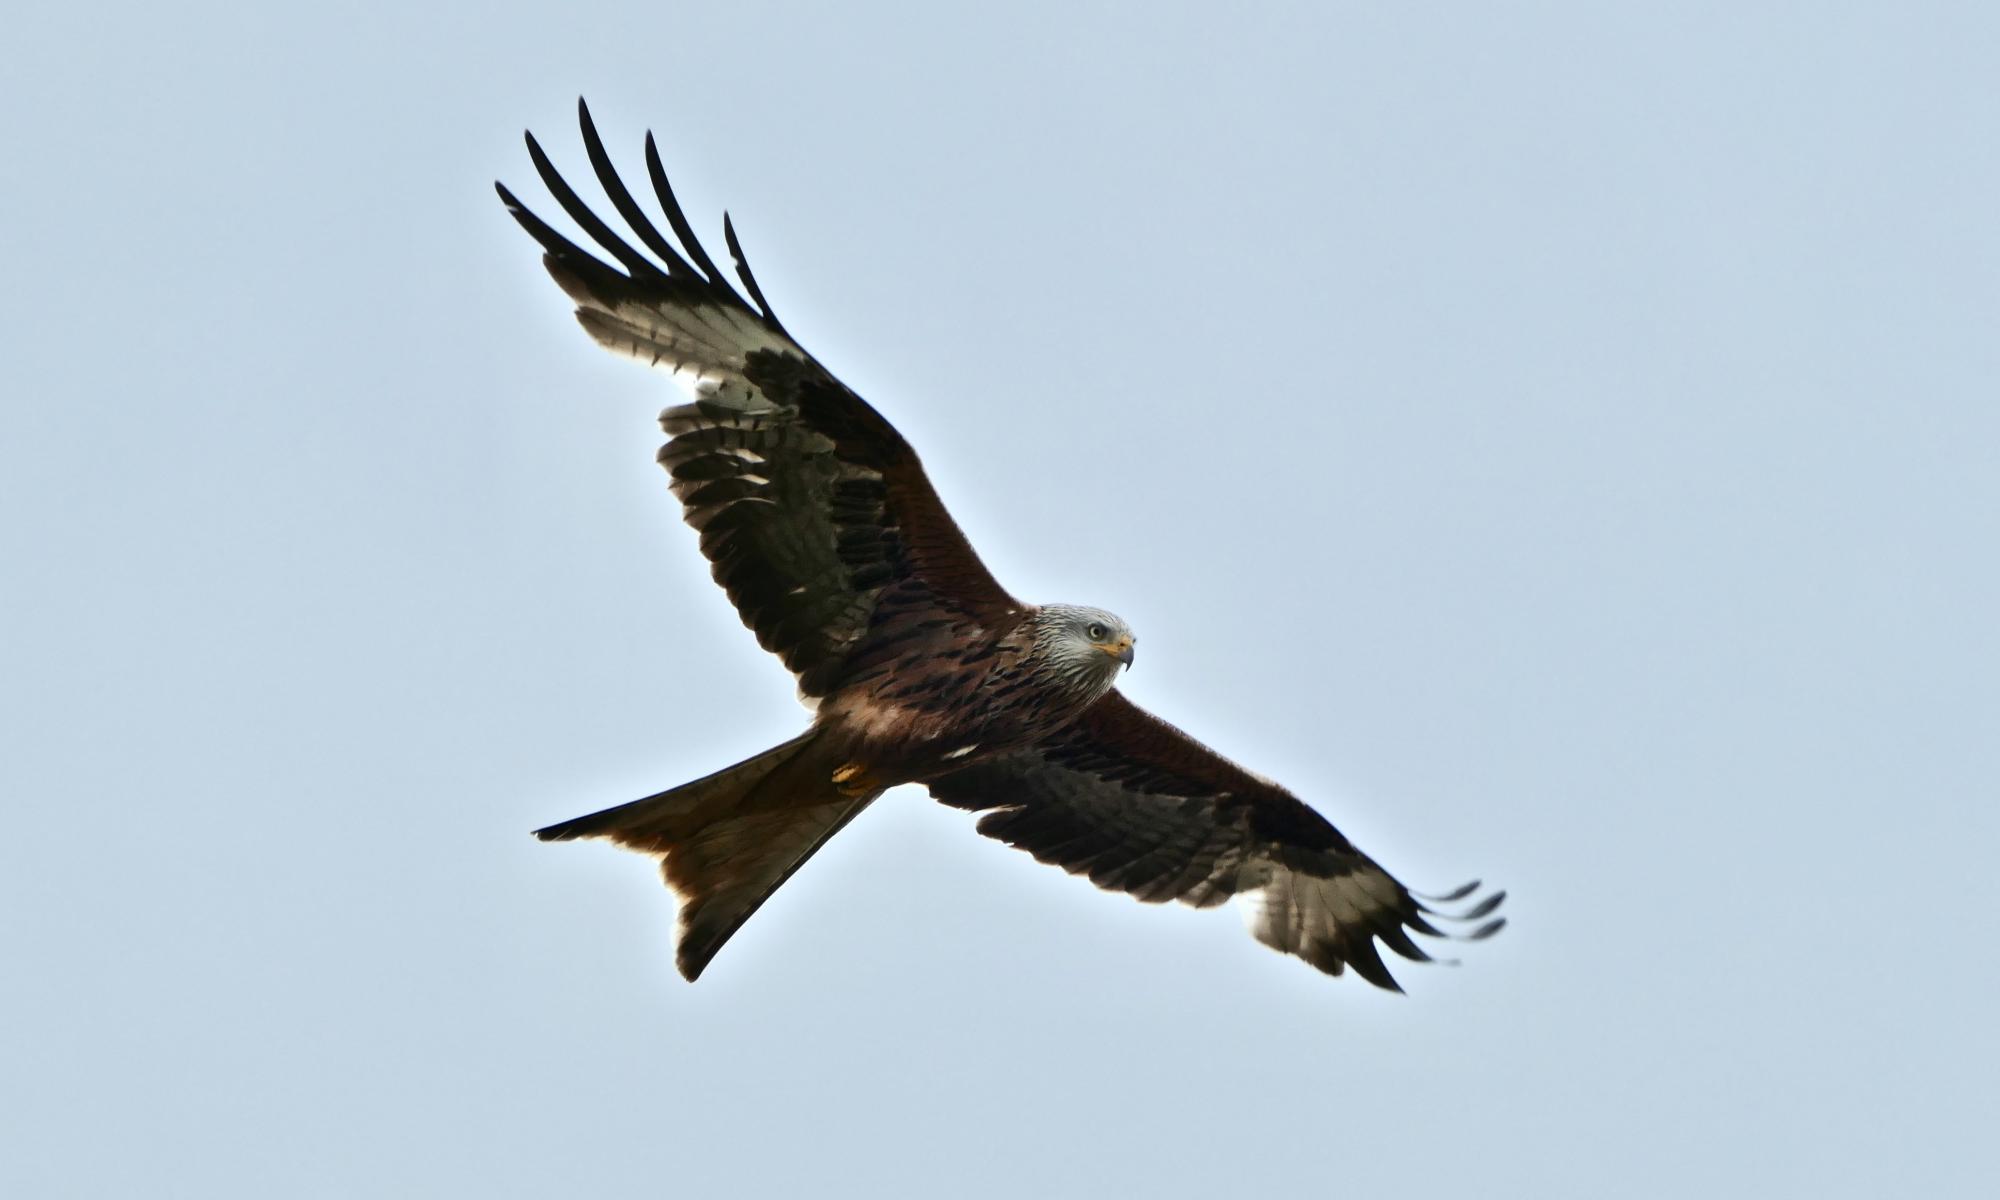 Red kites thriving in England 30 years after reintroduction